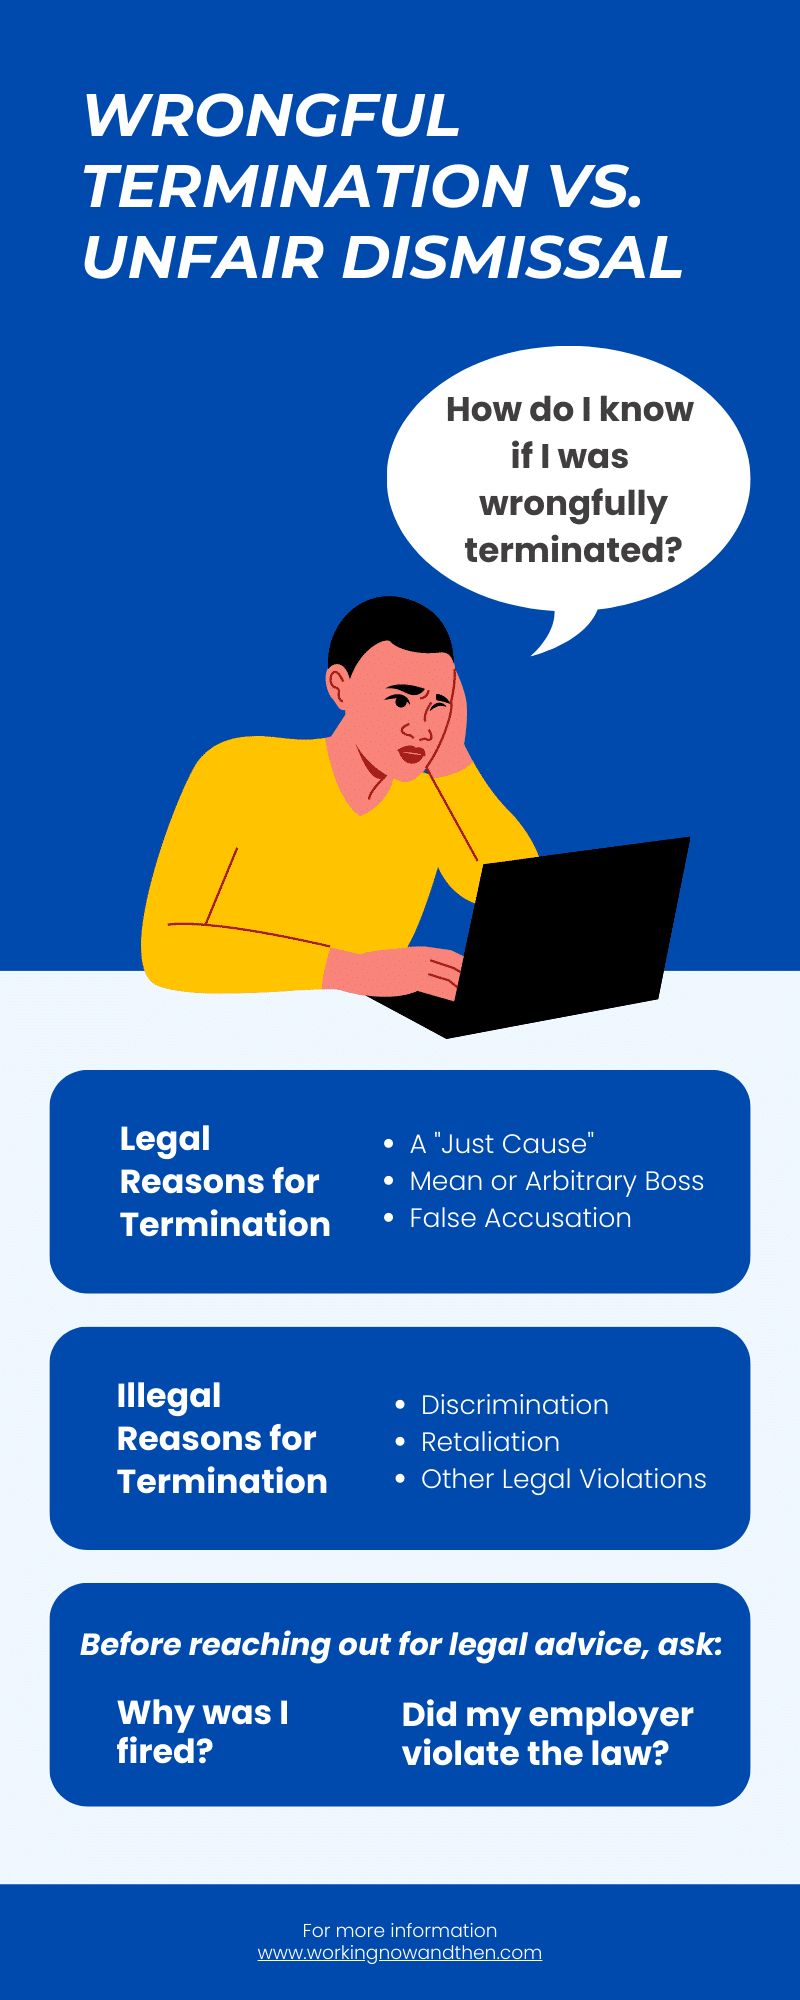 What Does Termination of Employment Mean?